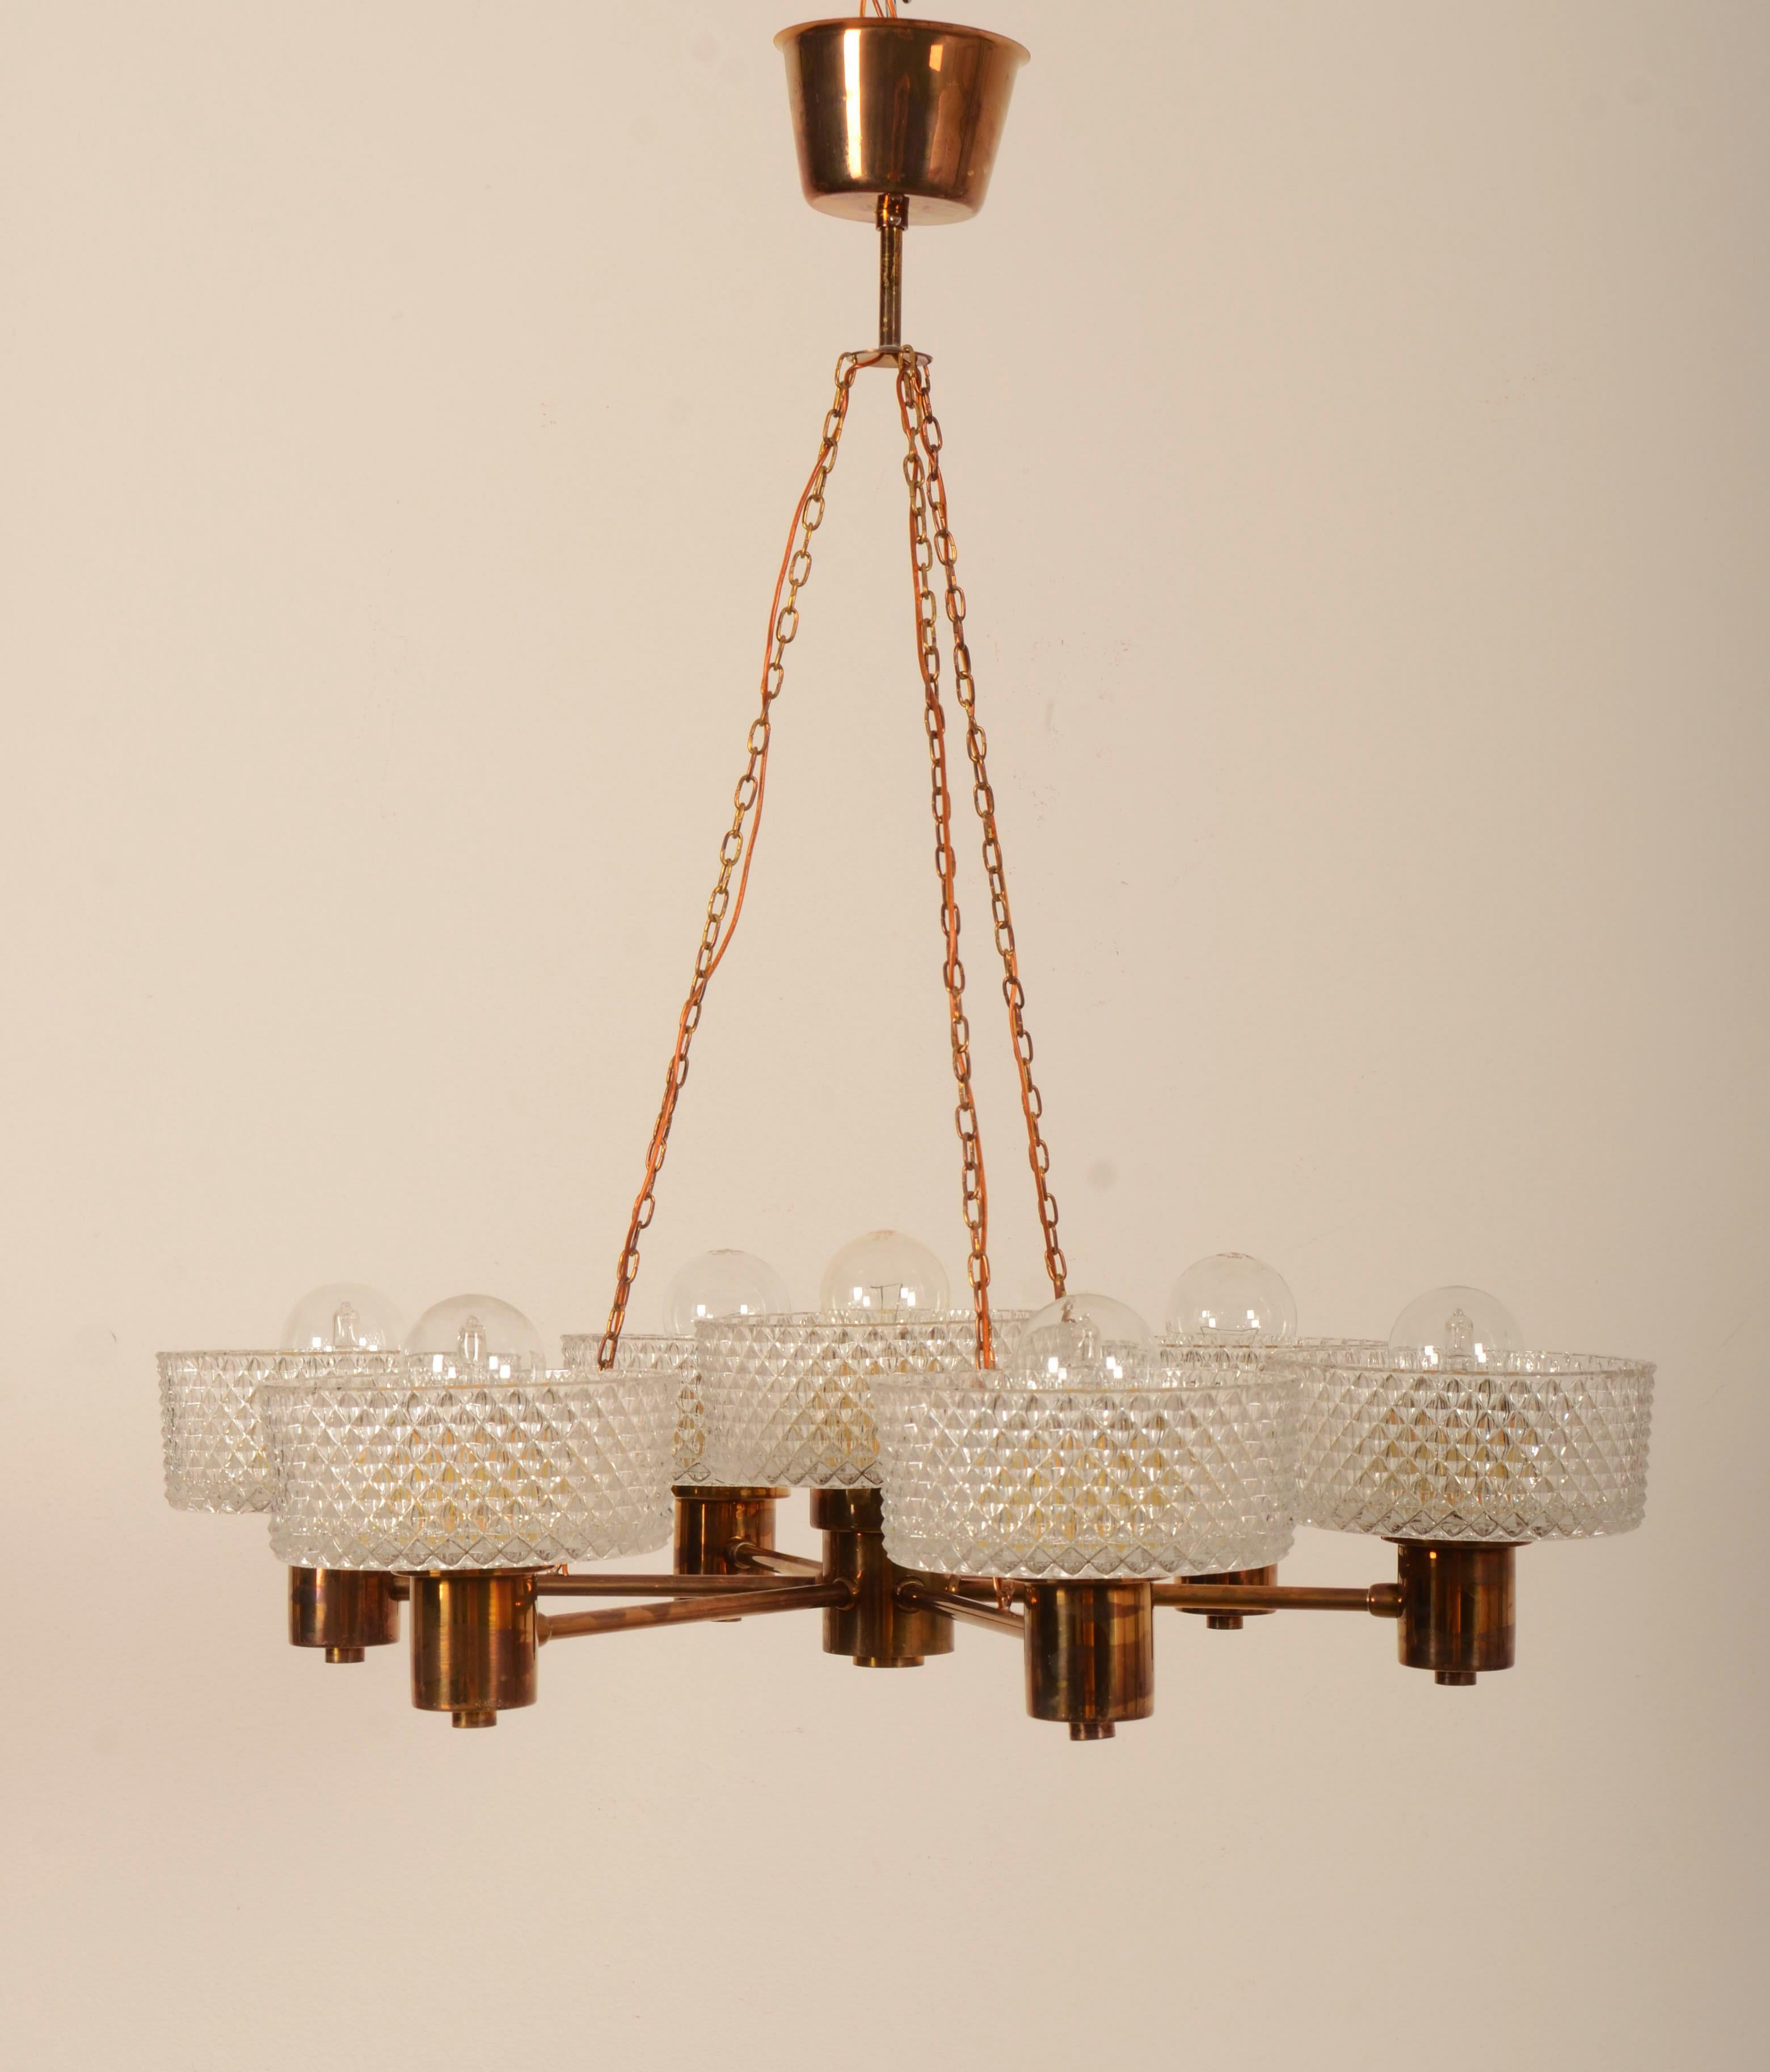 Scandinavian Modern Brass and Glass Chandelier by Orrefors from the 1960s For Sale